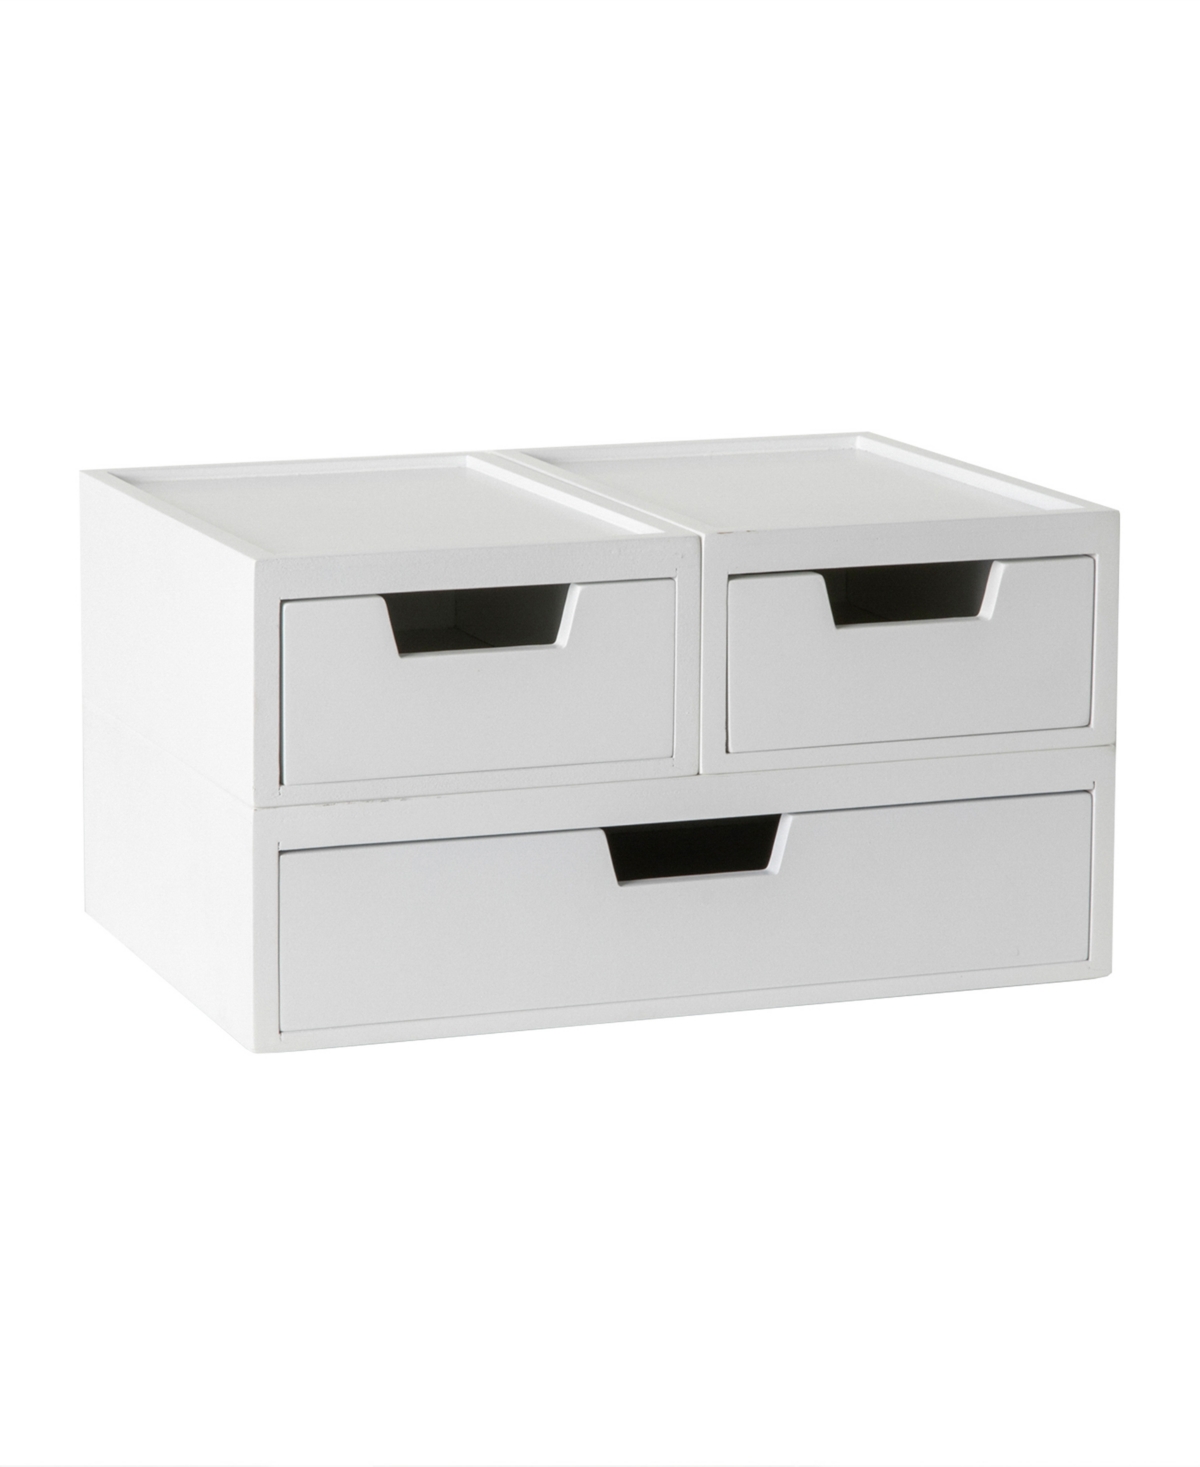 Martha Stewart Weston Stackable Engineered Wood Boxes With Drawers, Office Desktop Organizers, 3 Compartments In White